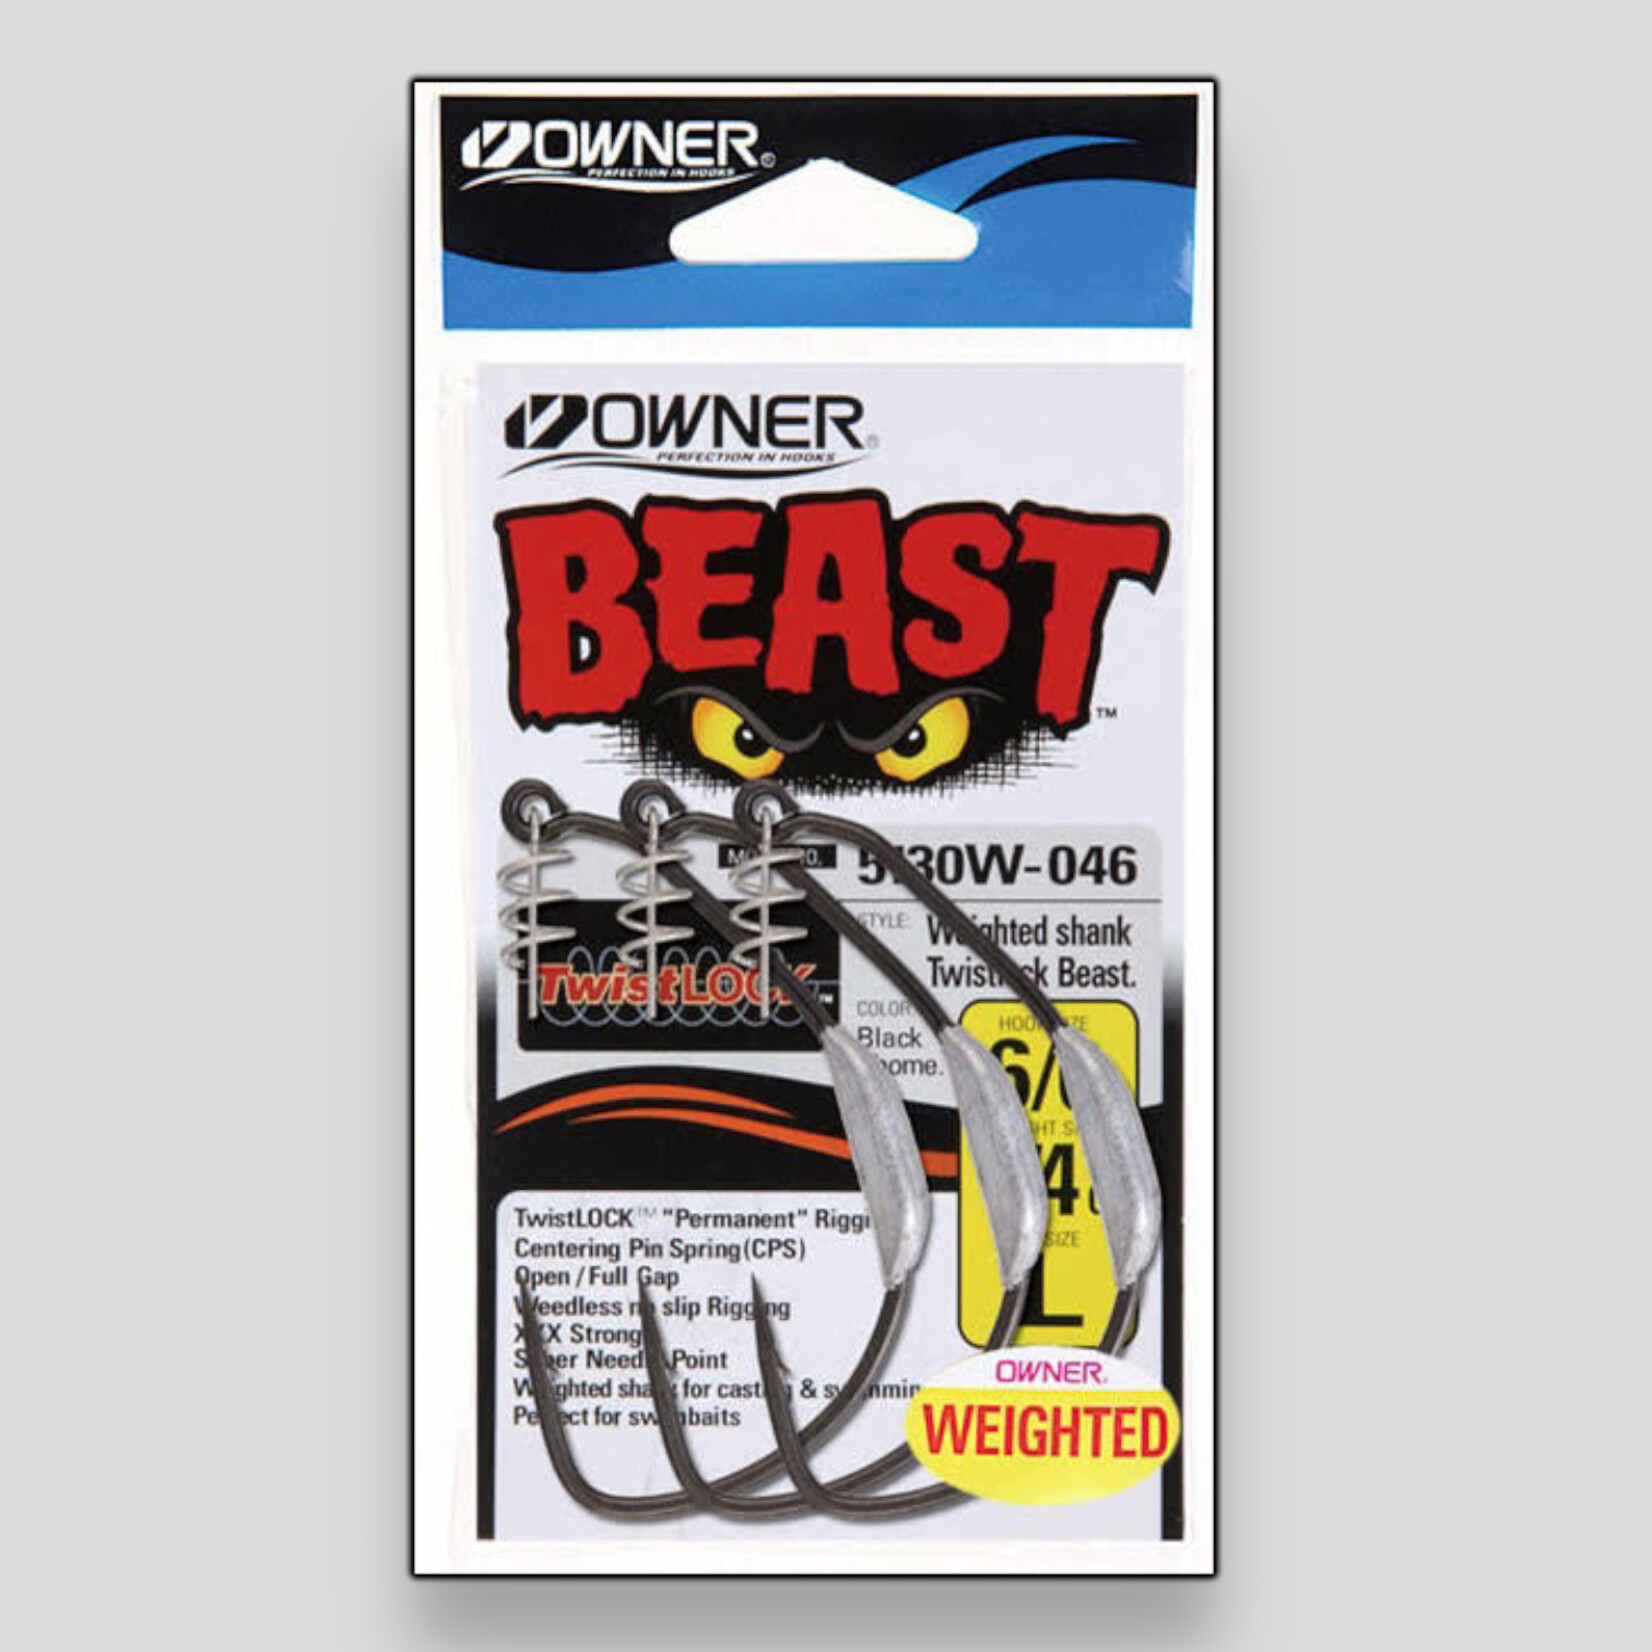 Owner Owner Beast Weighted Hook